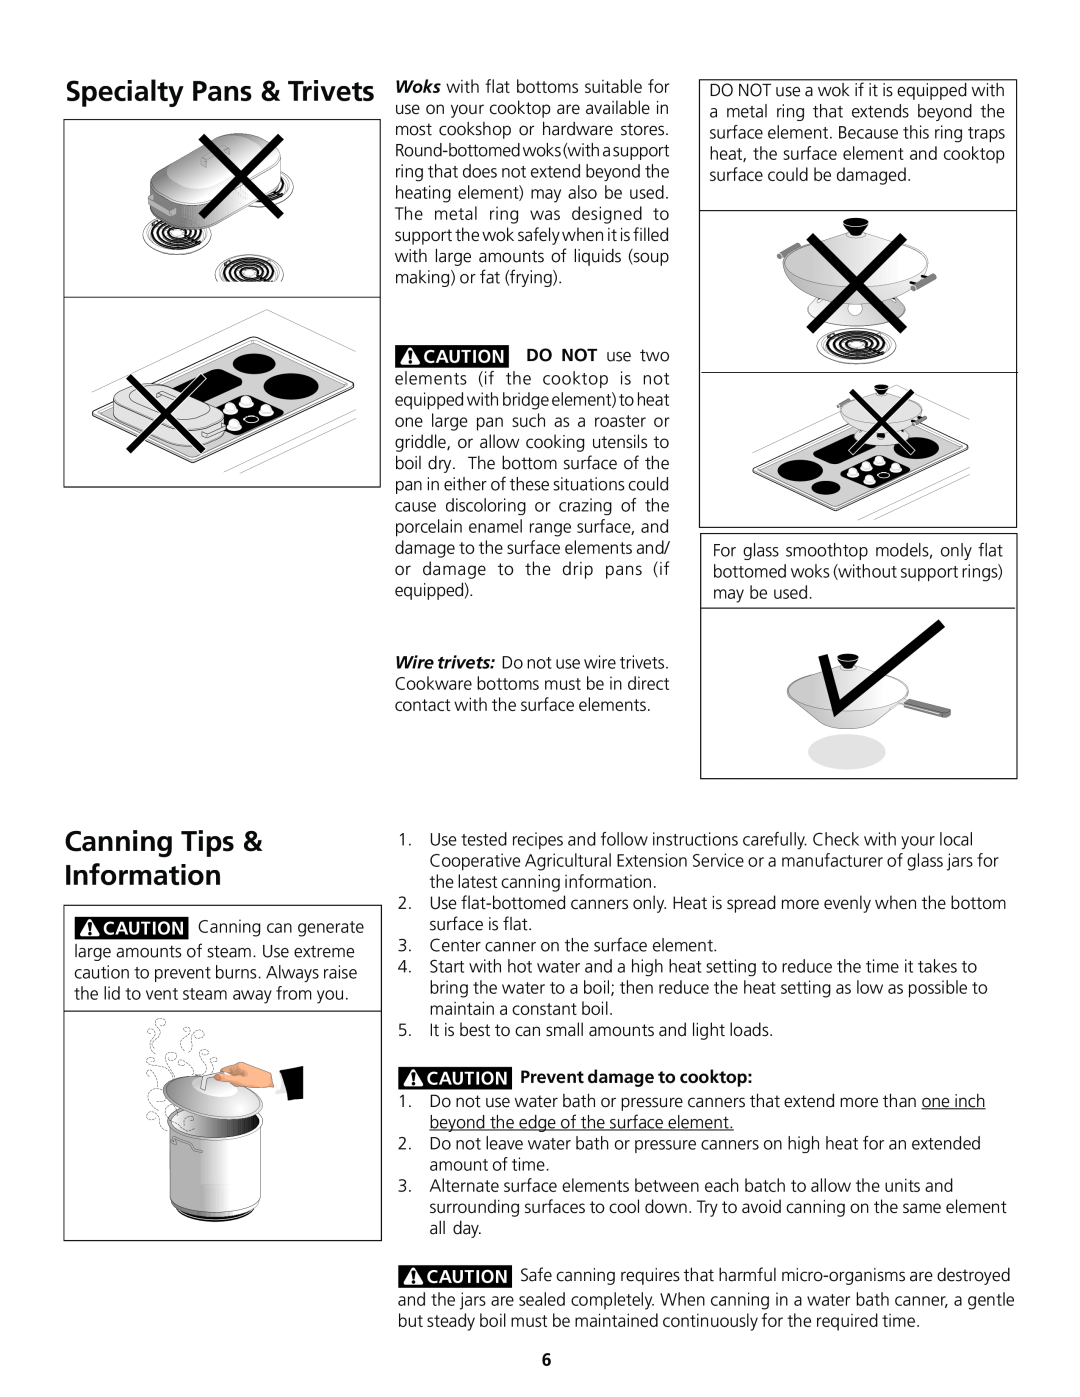 Frigidaire 318200830 important safety instructions Canning Tips Information, Prevent damage to cooktop 